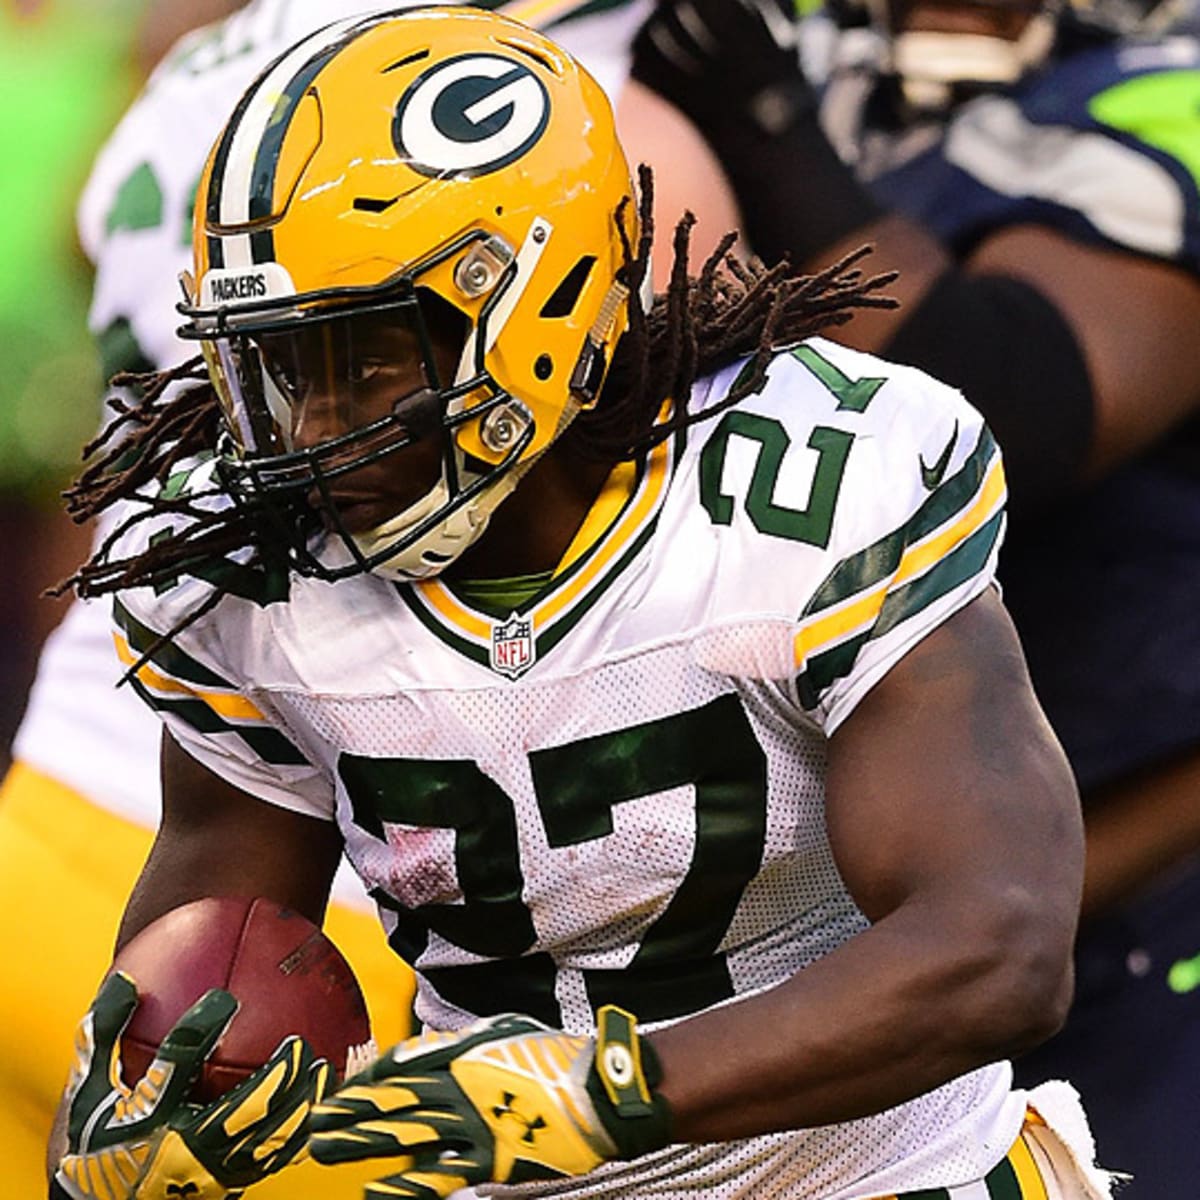 Packers look to carry on after rough game for Eddie Lacy – The Oakland Press